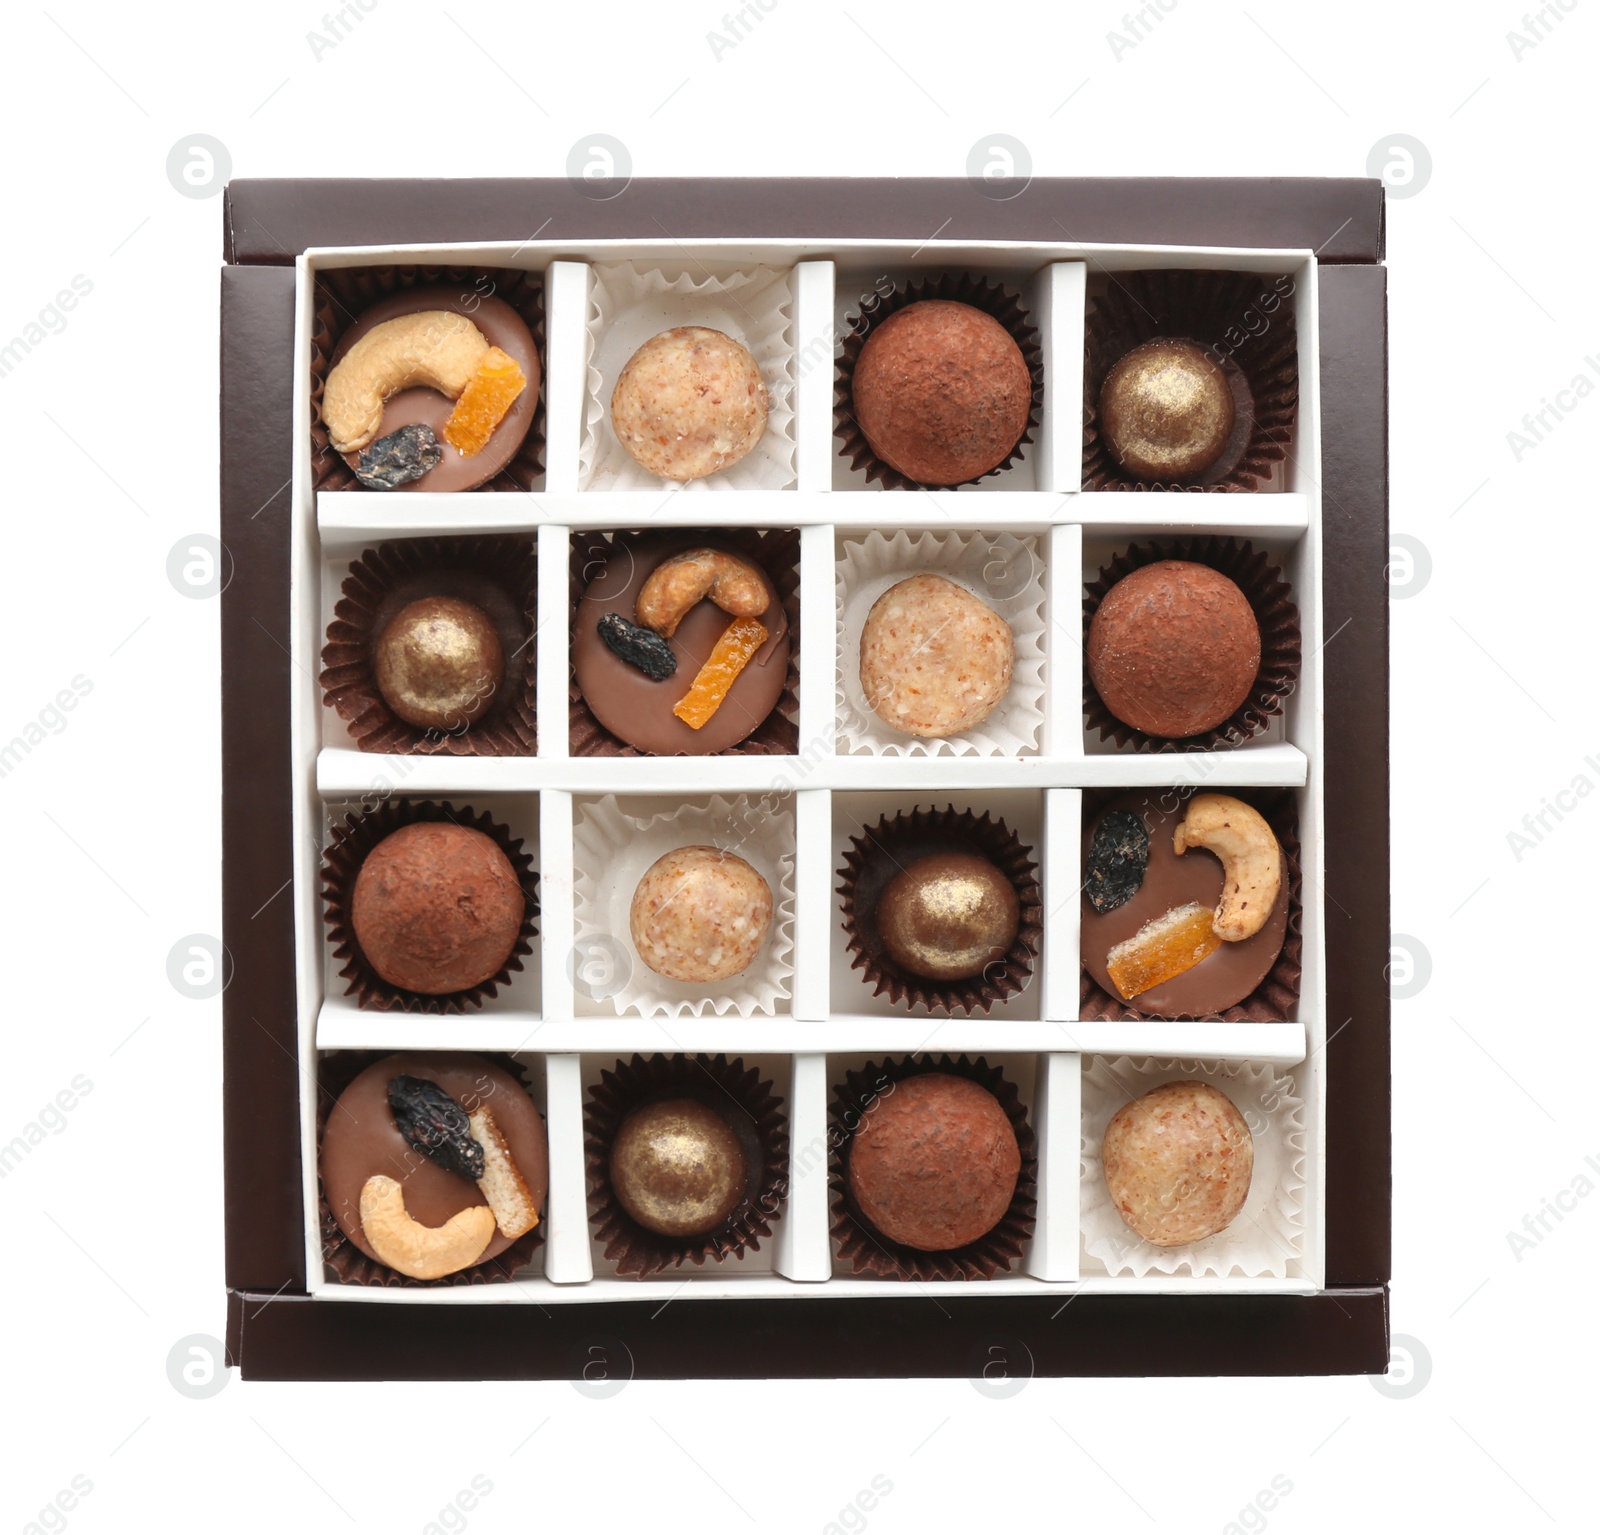 Photo of Delicious chocolate candies in box on white background, top view